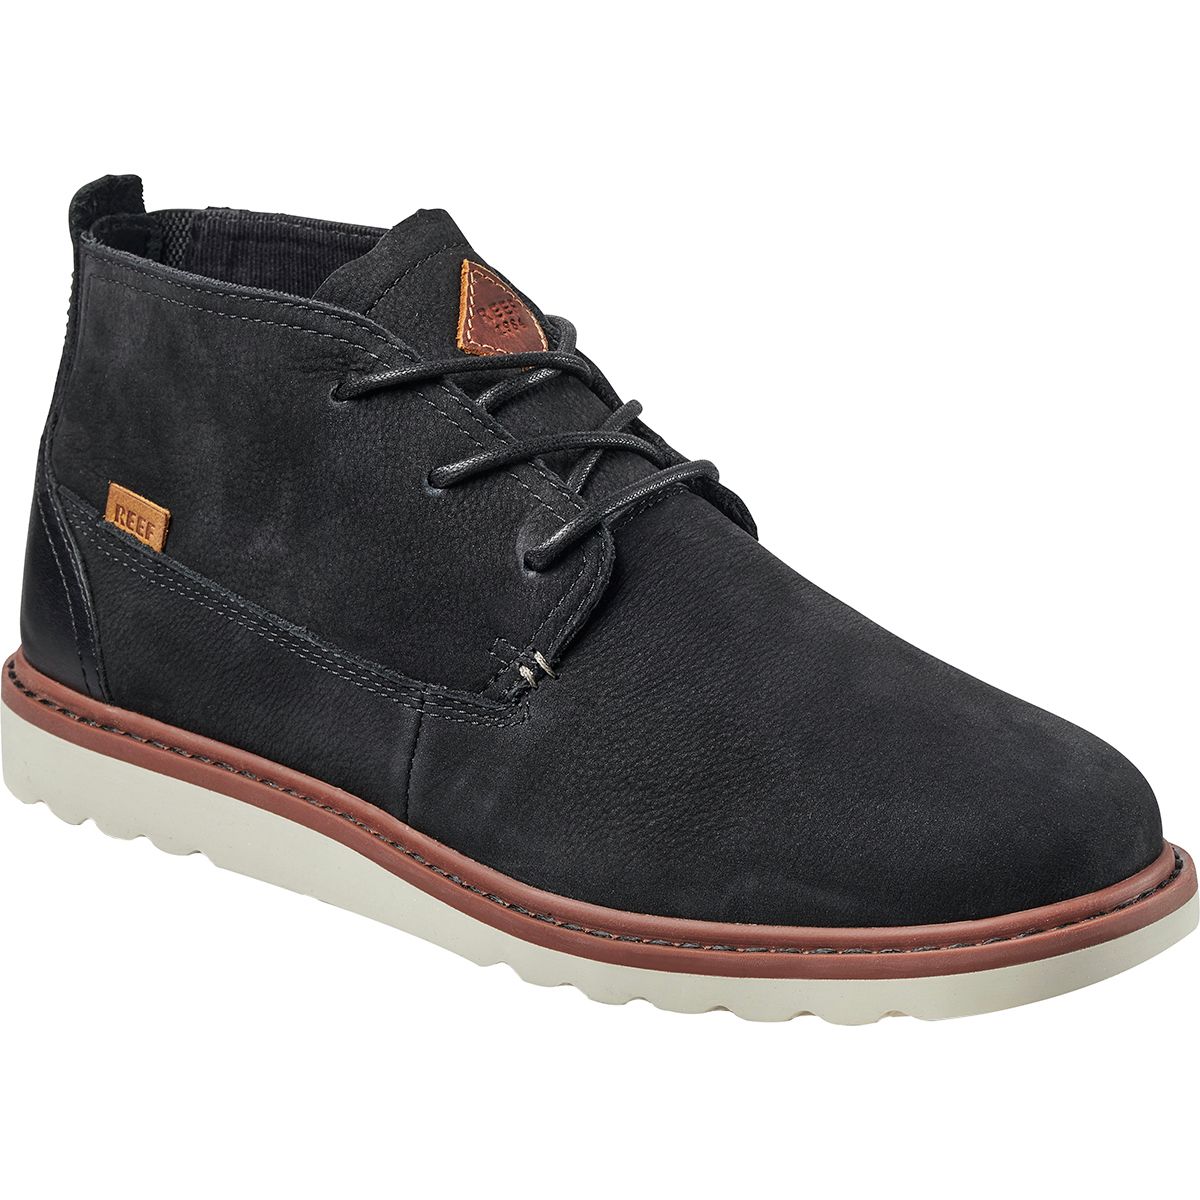 Reef Voyage Boot - Men's | Backcountry.com